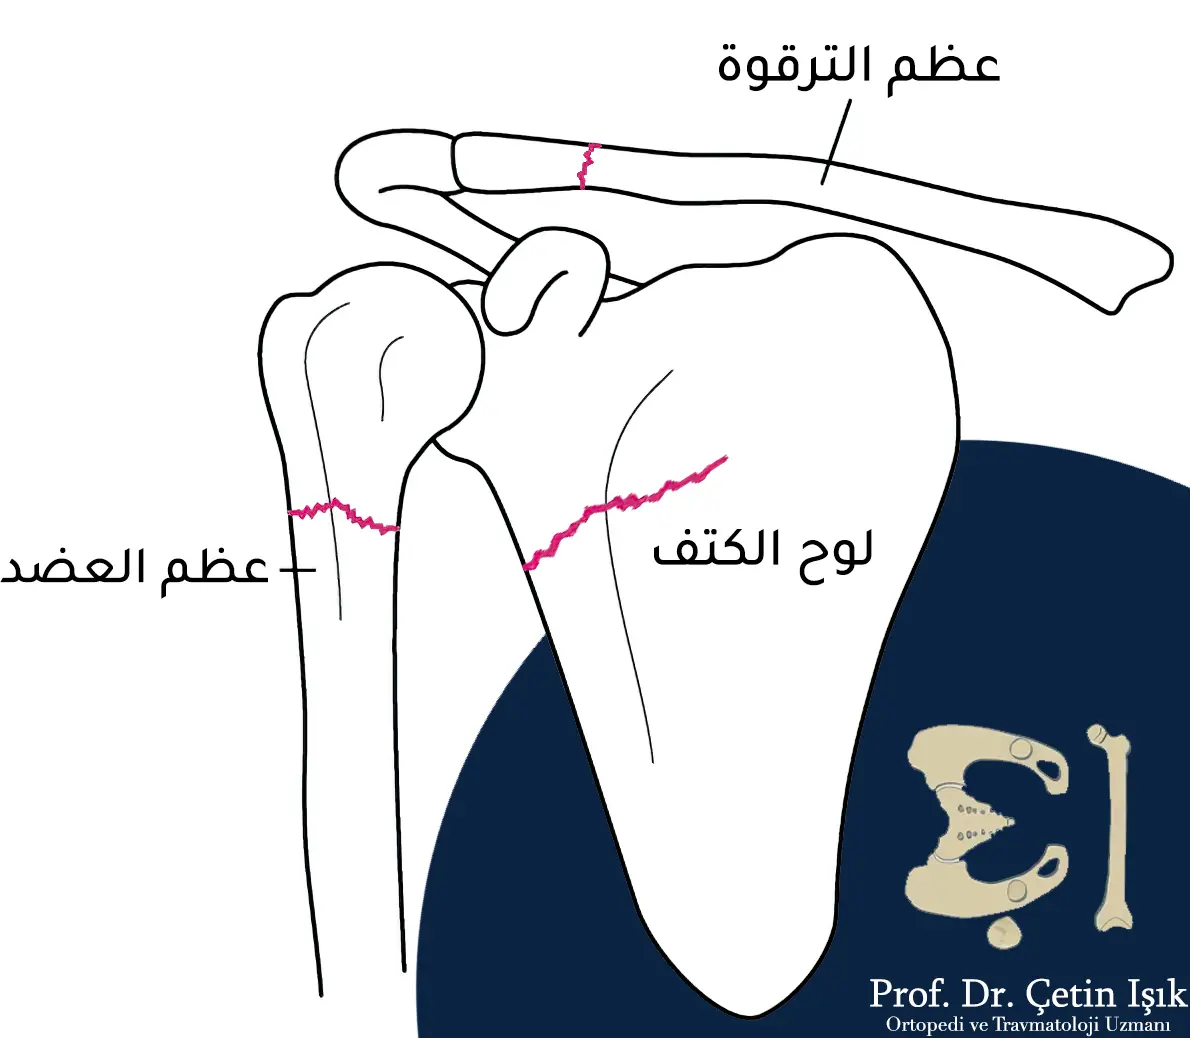 From the picture, we can see the types of shoulder fracture, which are the clavicle fracture, the scapula fracture, and the humerus fracture